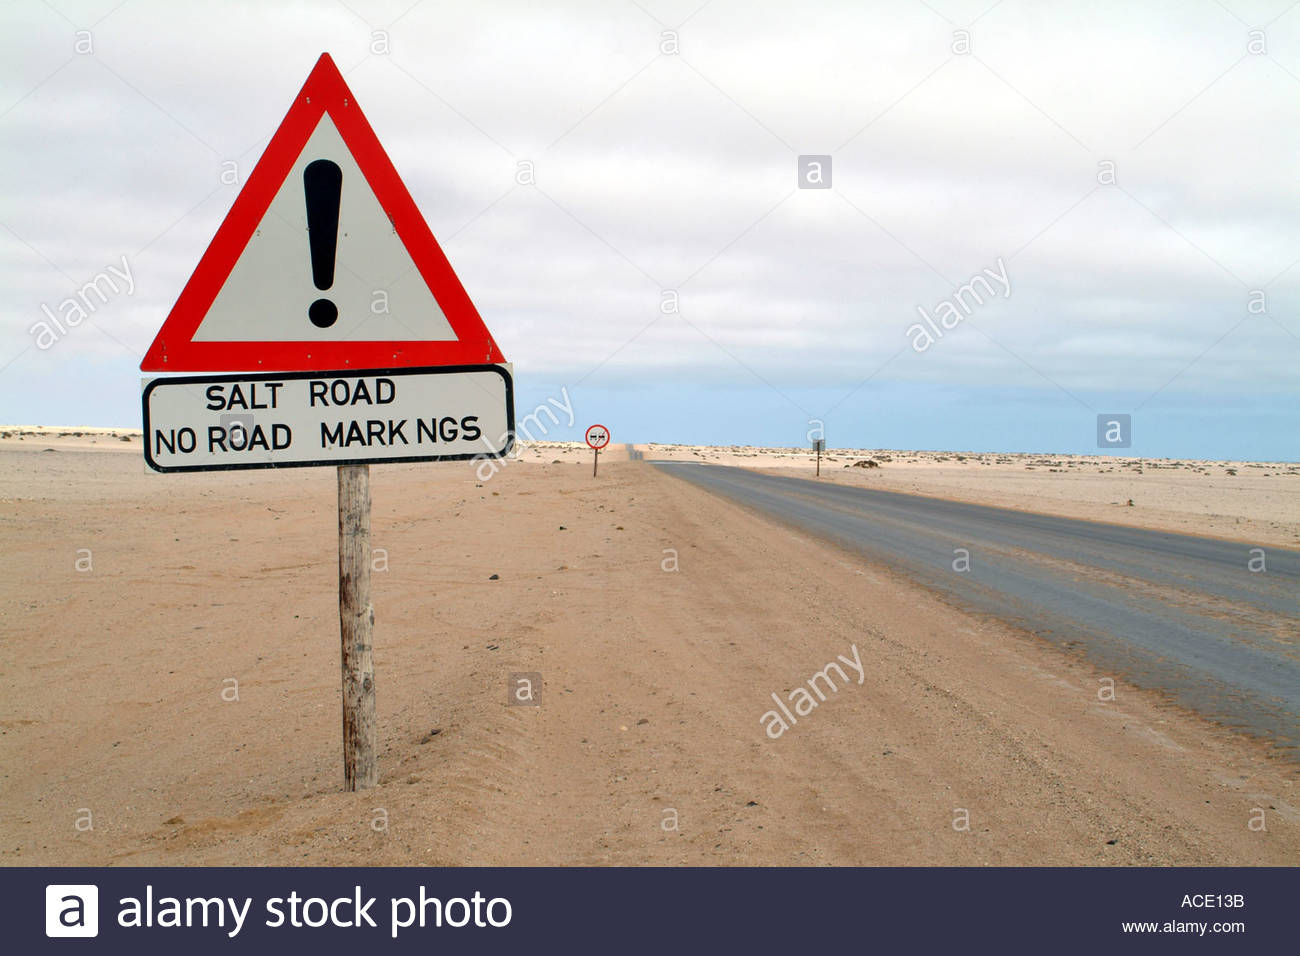 Image result for sand and salt road in namibia